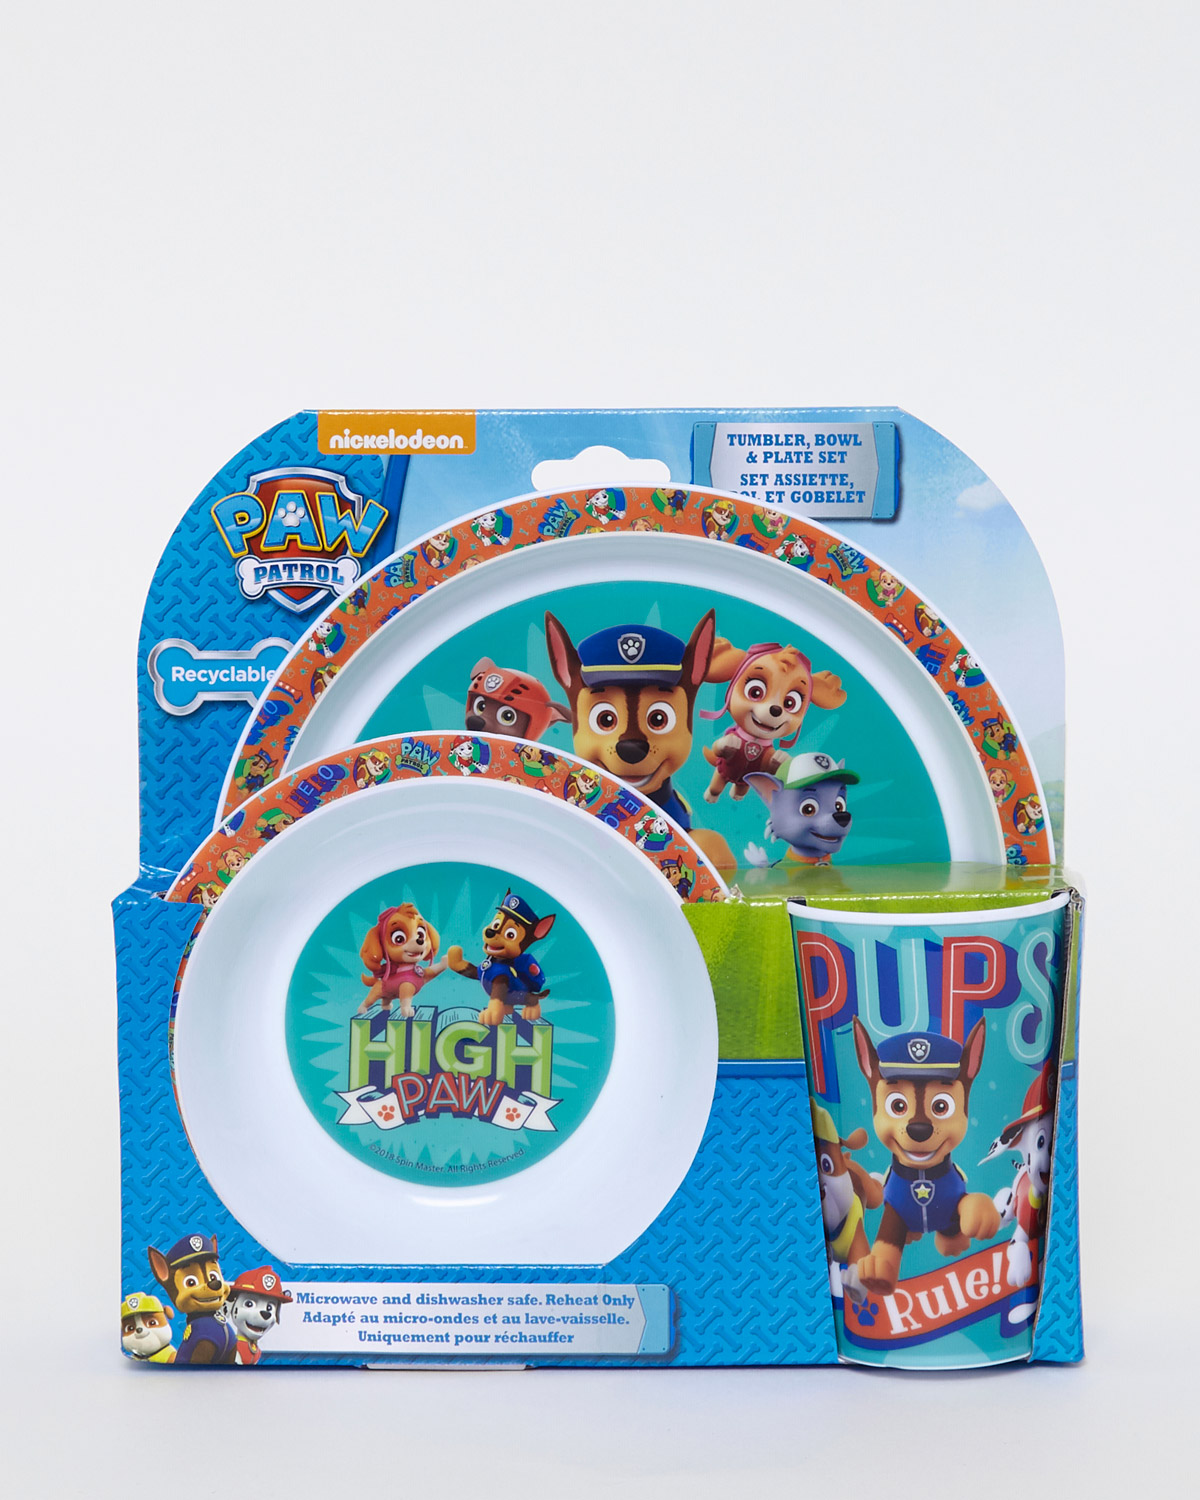 Dunnes Stores  B-paw-patrol Paw Patrol Cutlery Set - Pack Of 3